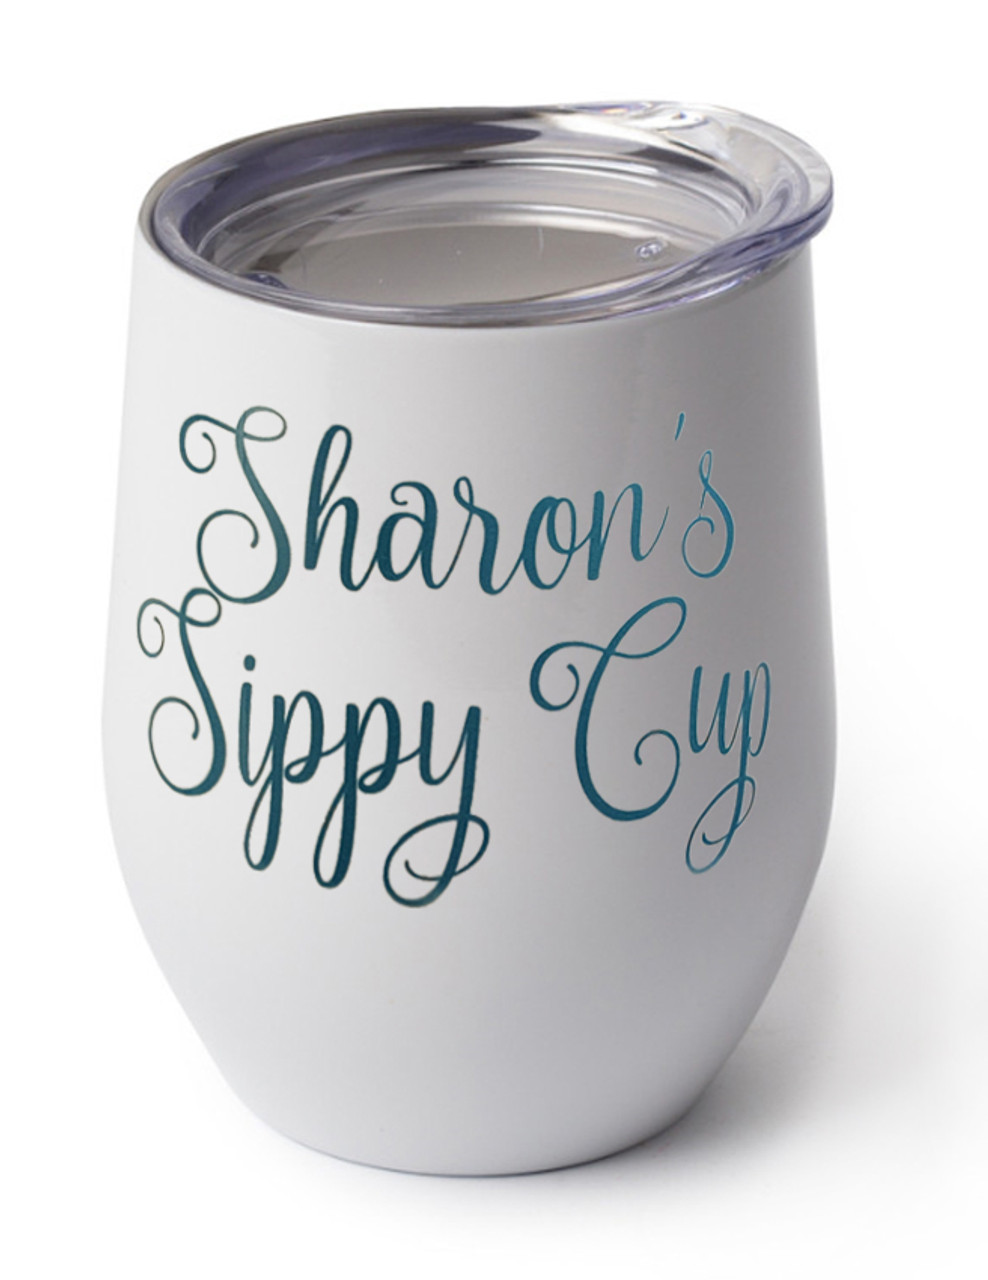 https://cdn11.bigcommerce.com/s-wyan3/images/stencil/1280x1280/products/2310/6752/WineSippyCup__15655.1559779527.jpg?c=2